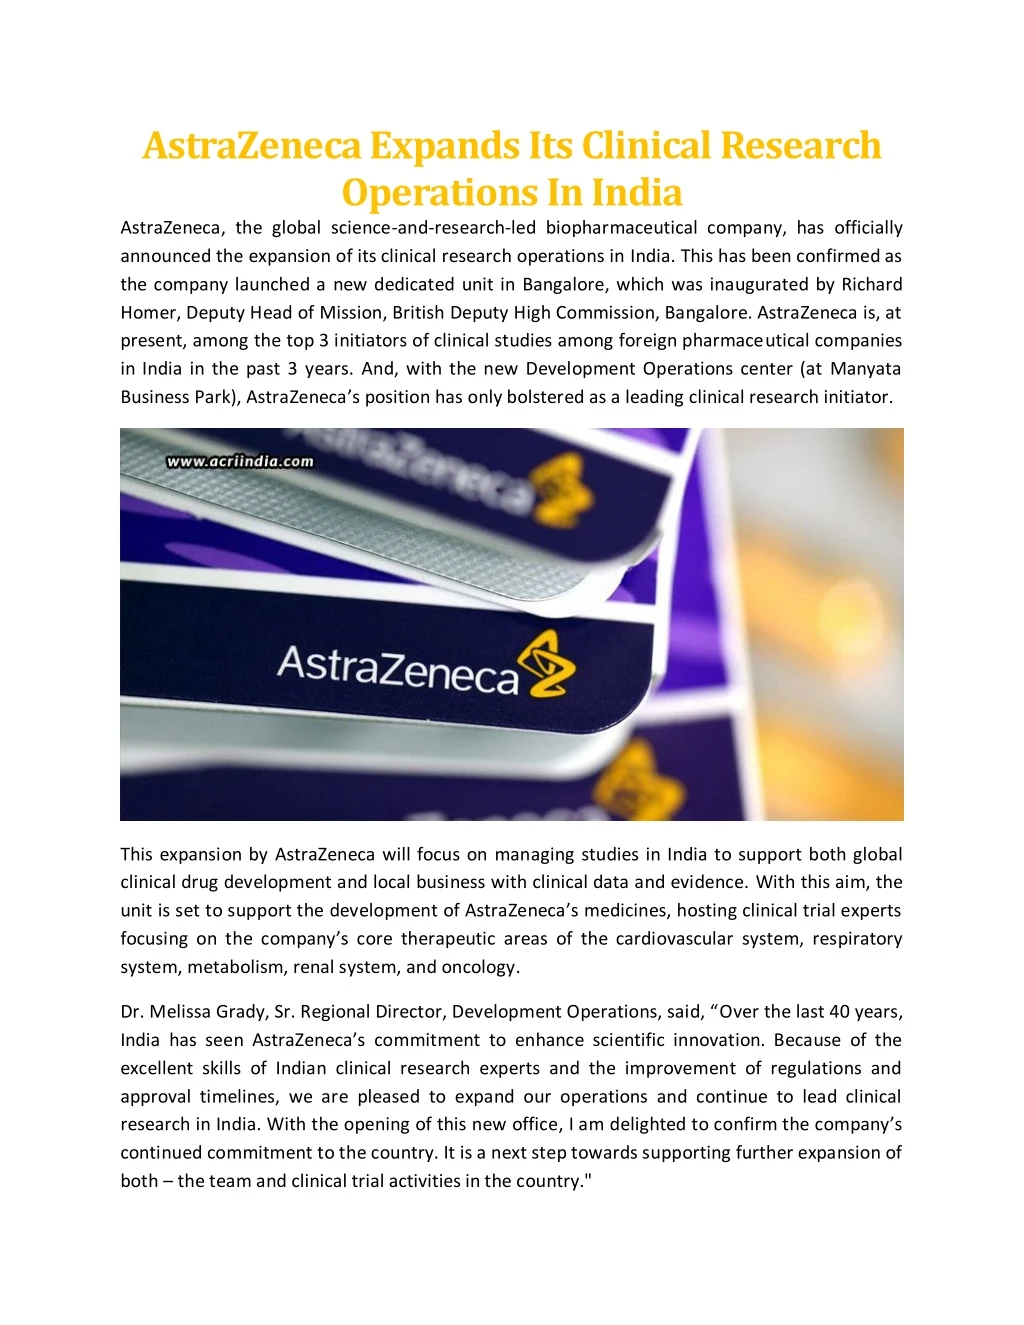 astrazeneca expands its clinical research